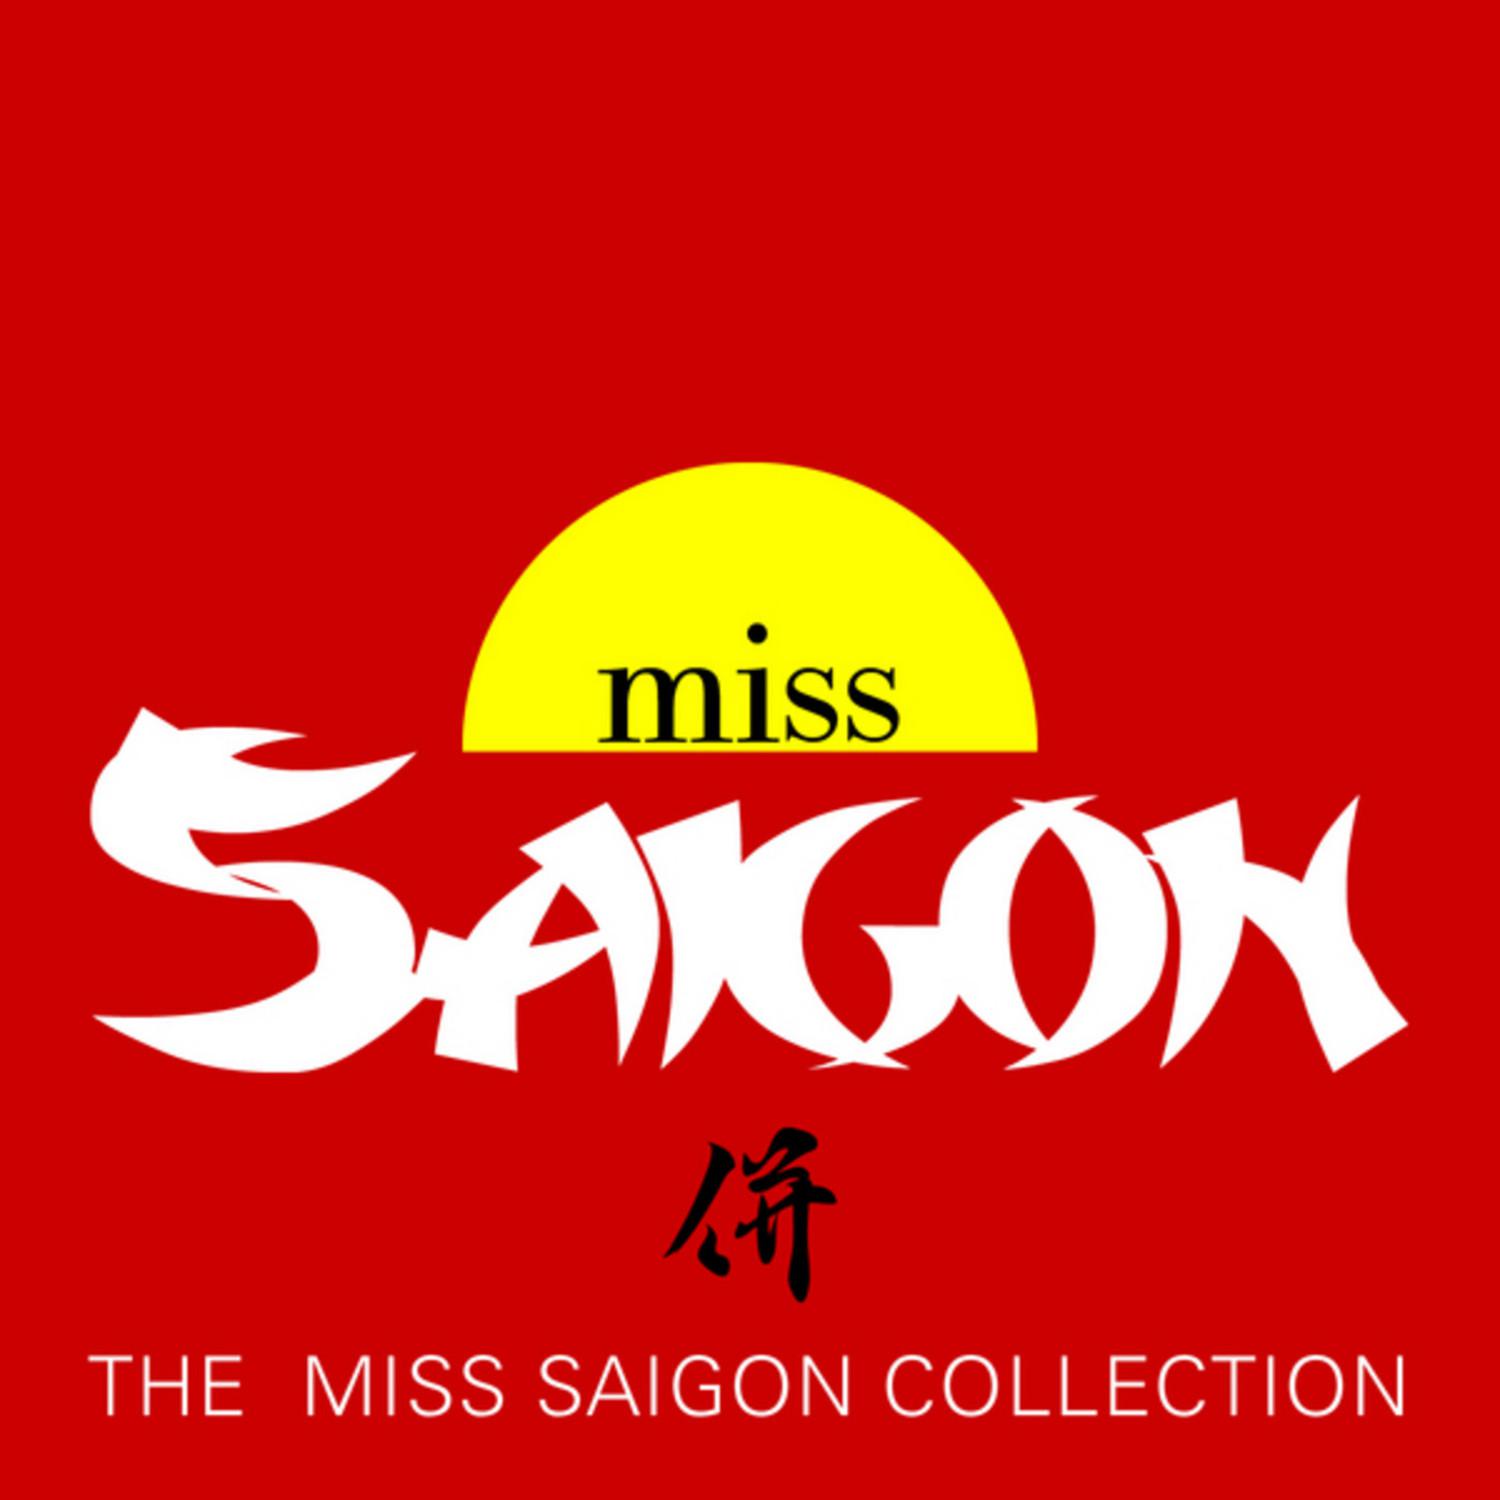 The heat Is On In Saigon